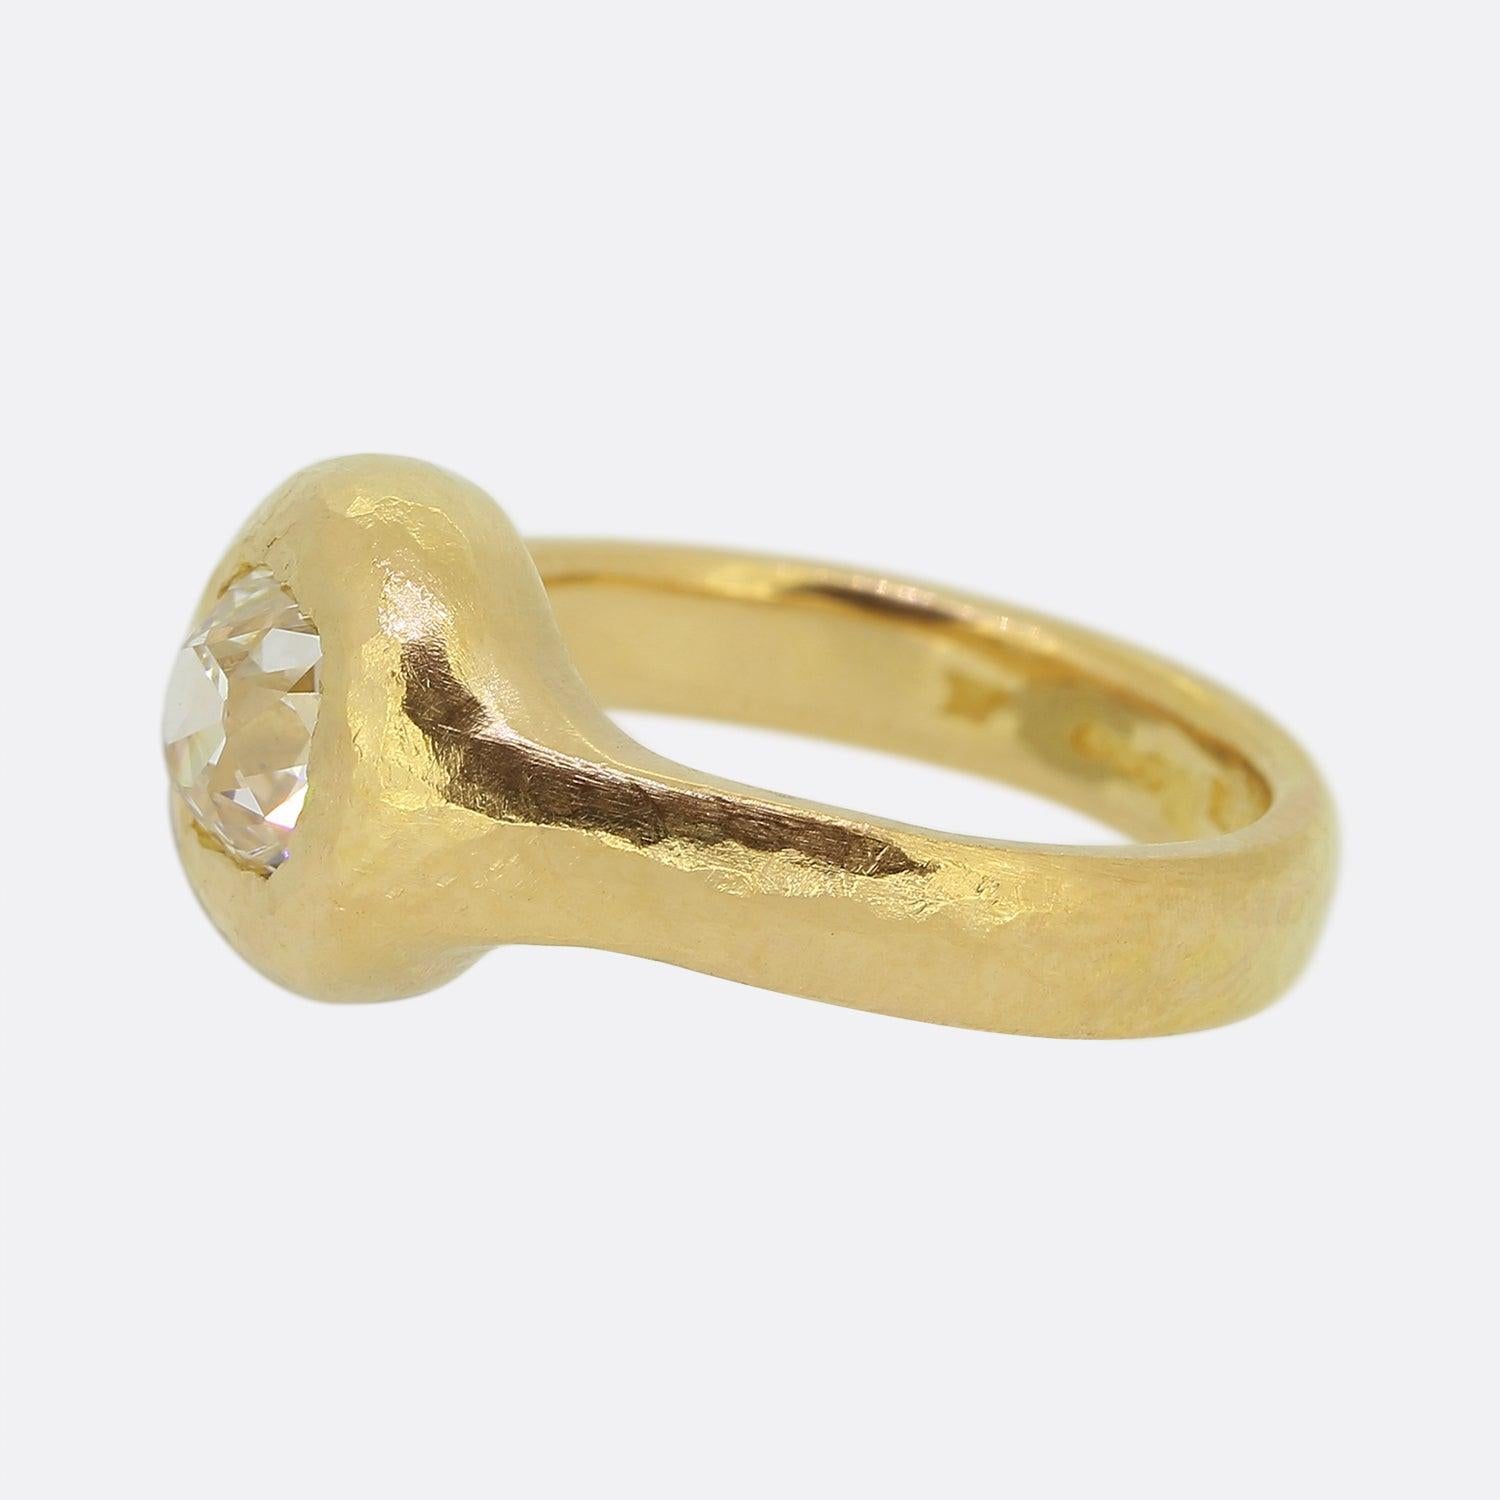 Here we have an outstanding single stone diamond ring. As expected from 22ct gold, a rich gold colour-tone is on show here with the piece featuring an entirely hammered finish from the band to the front setting which plays host to a tremendous